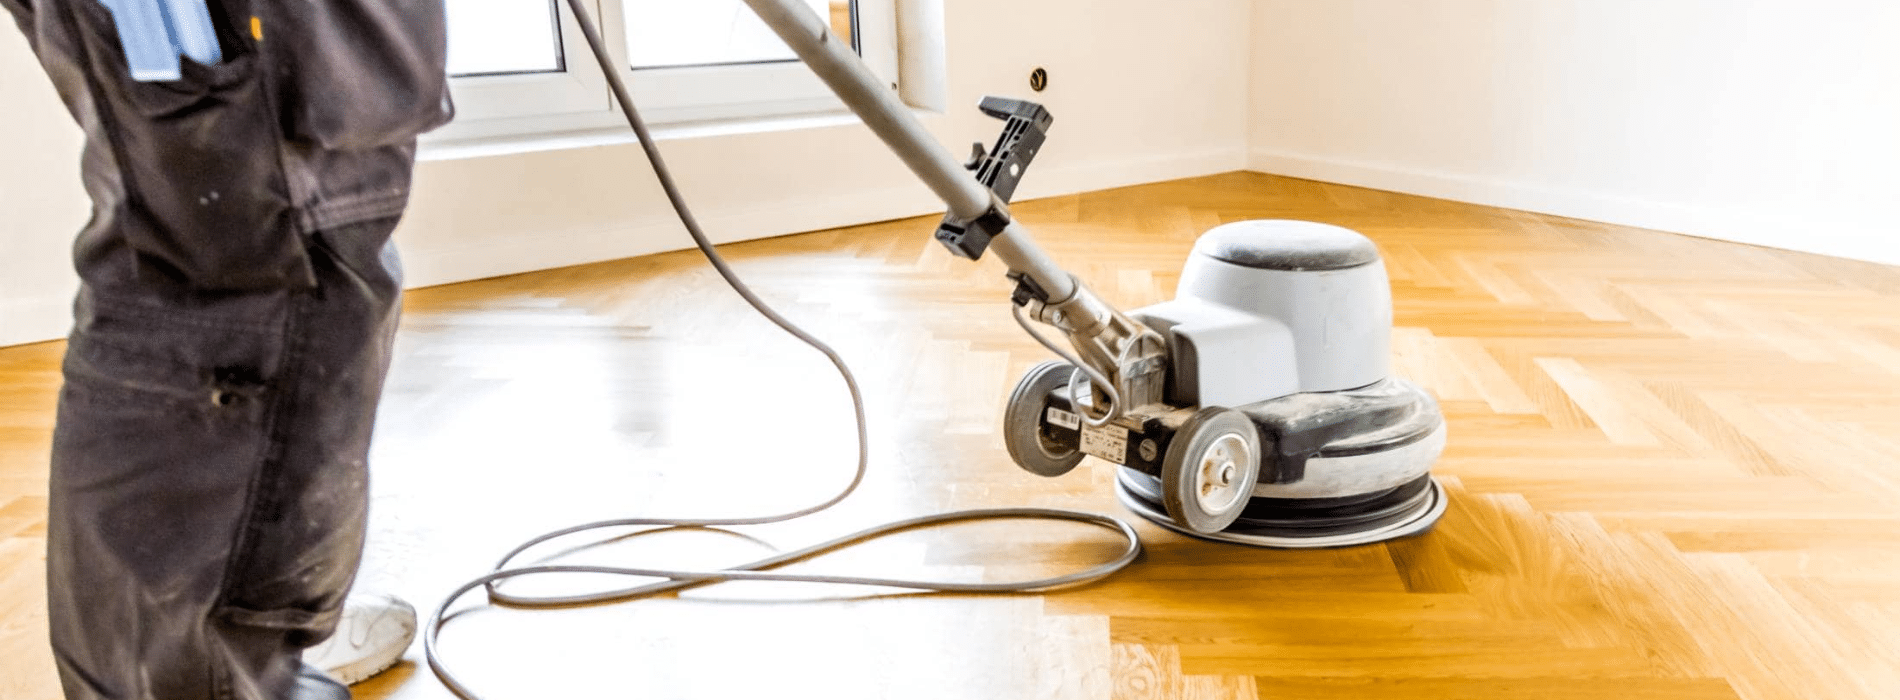 In Uxbridge, UB8, Mr Sander® are using a Bona FlexiSand 1.5, a powerful floor buffer sander with a diameter of 407 mm. It has a 1.5 kW effect and operates on 230V with a frequency of 50 Hz/60 Hz. The sander is connected to a dust extraction system equipped with a HEPA filter to ensure a clean and efficient sanding process.